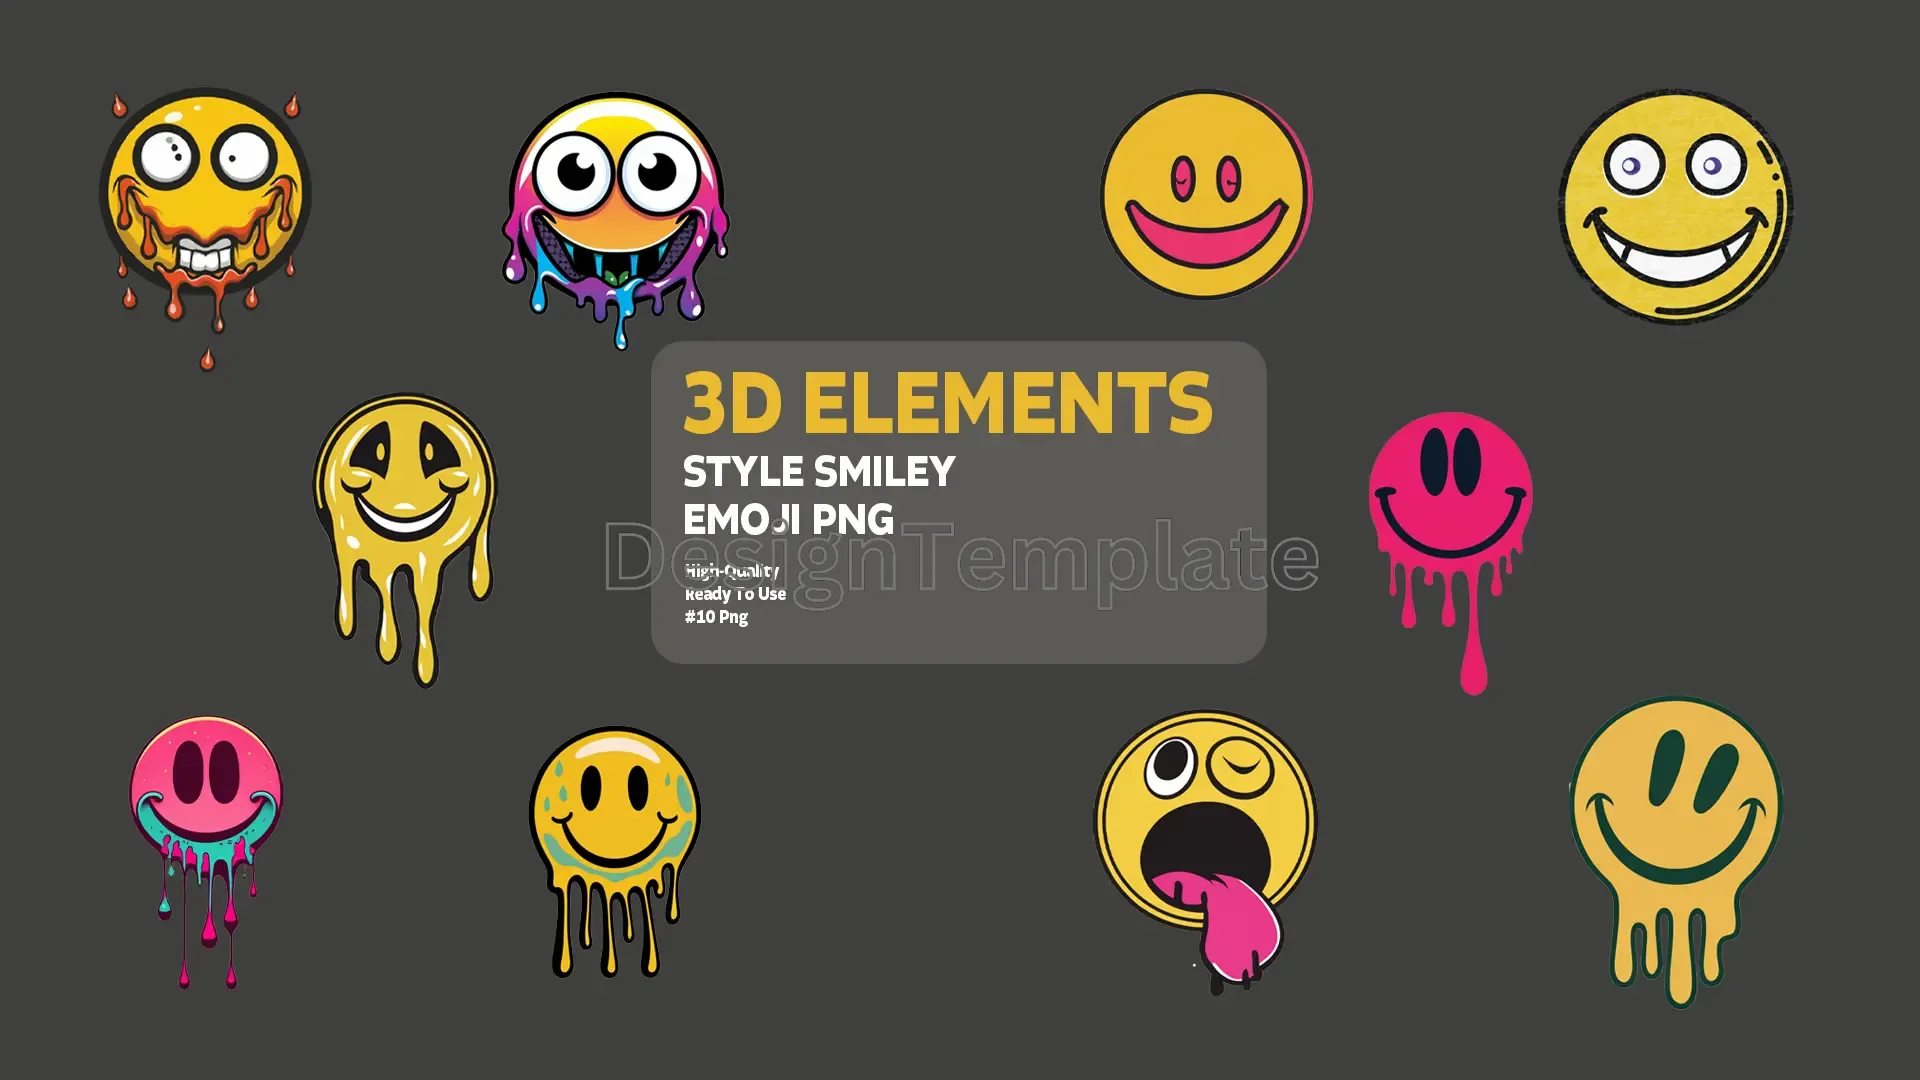 Express Yourself 3D Emoji Style Elements Graphics Pack